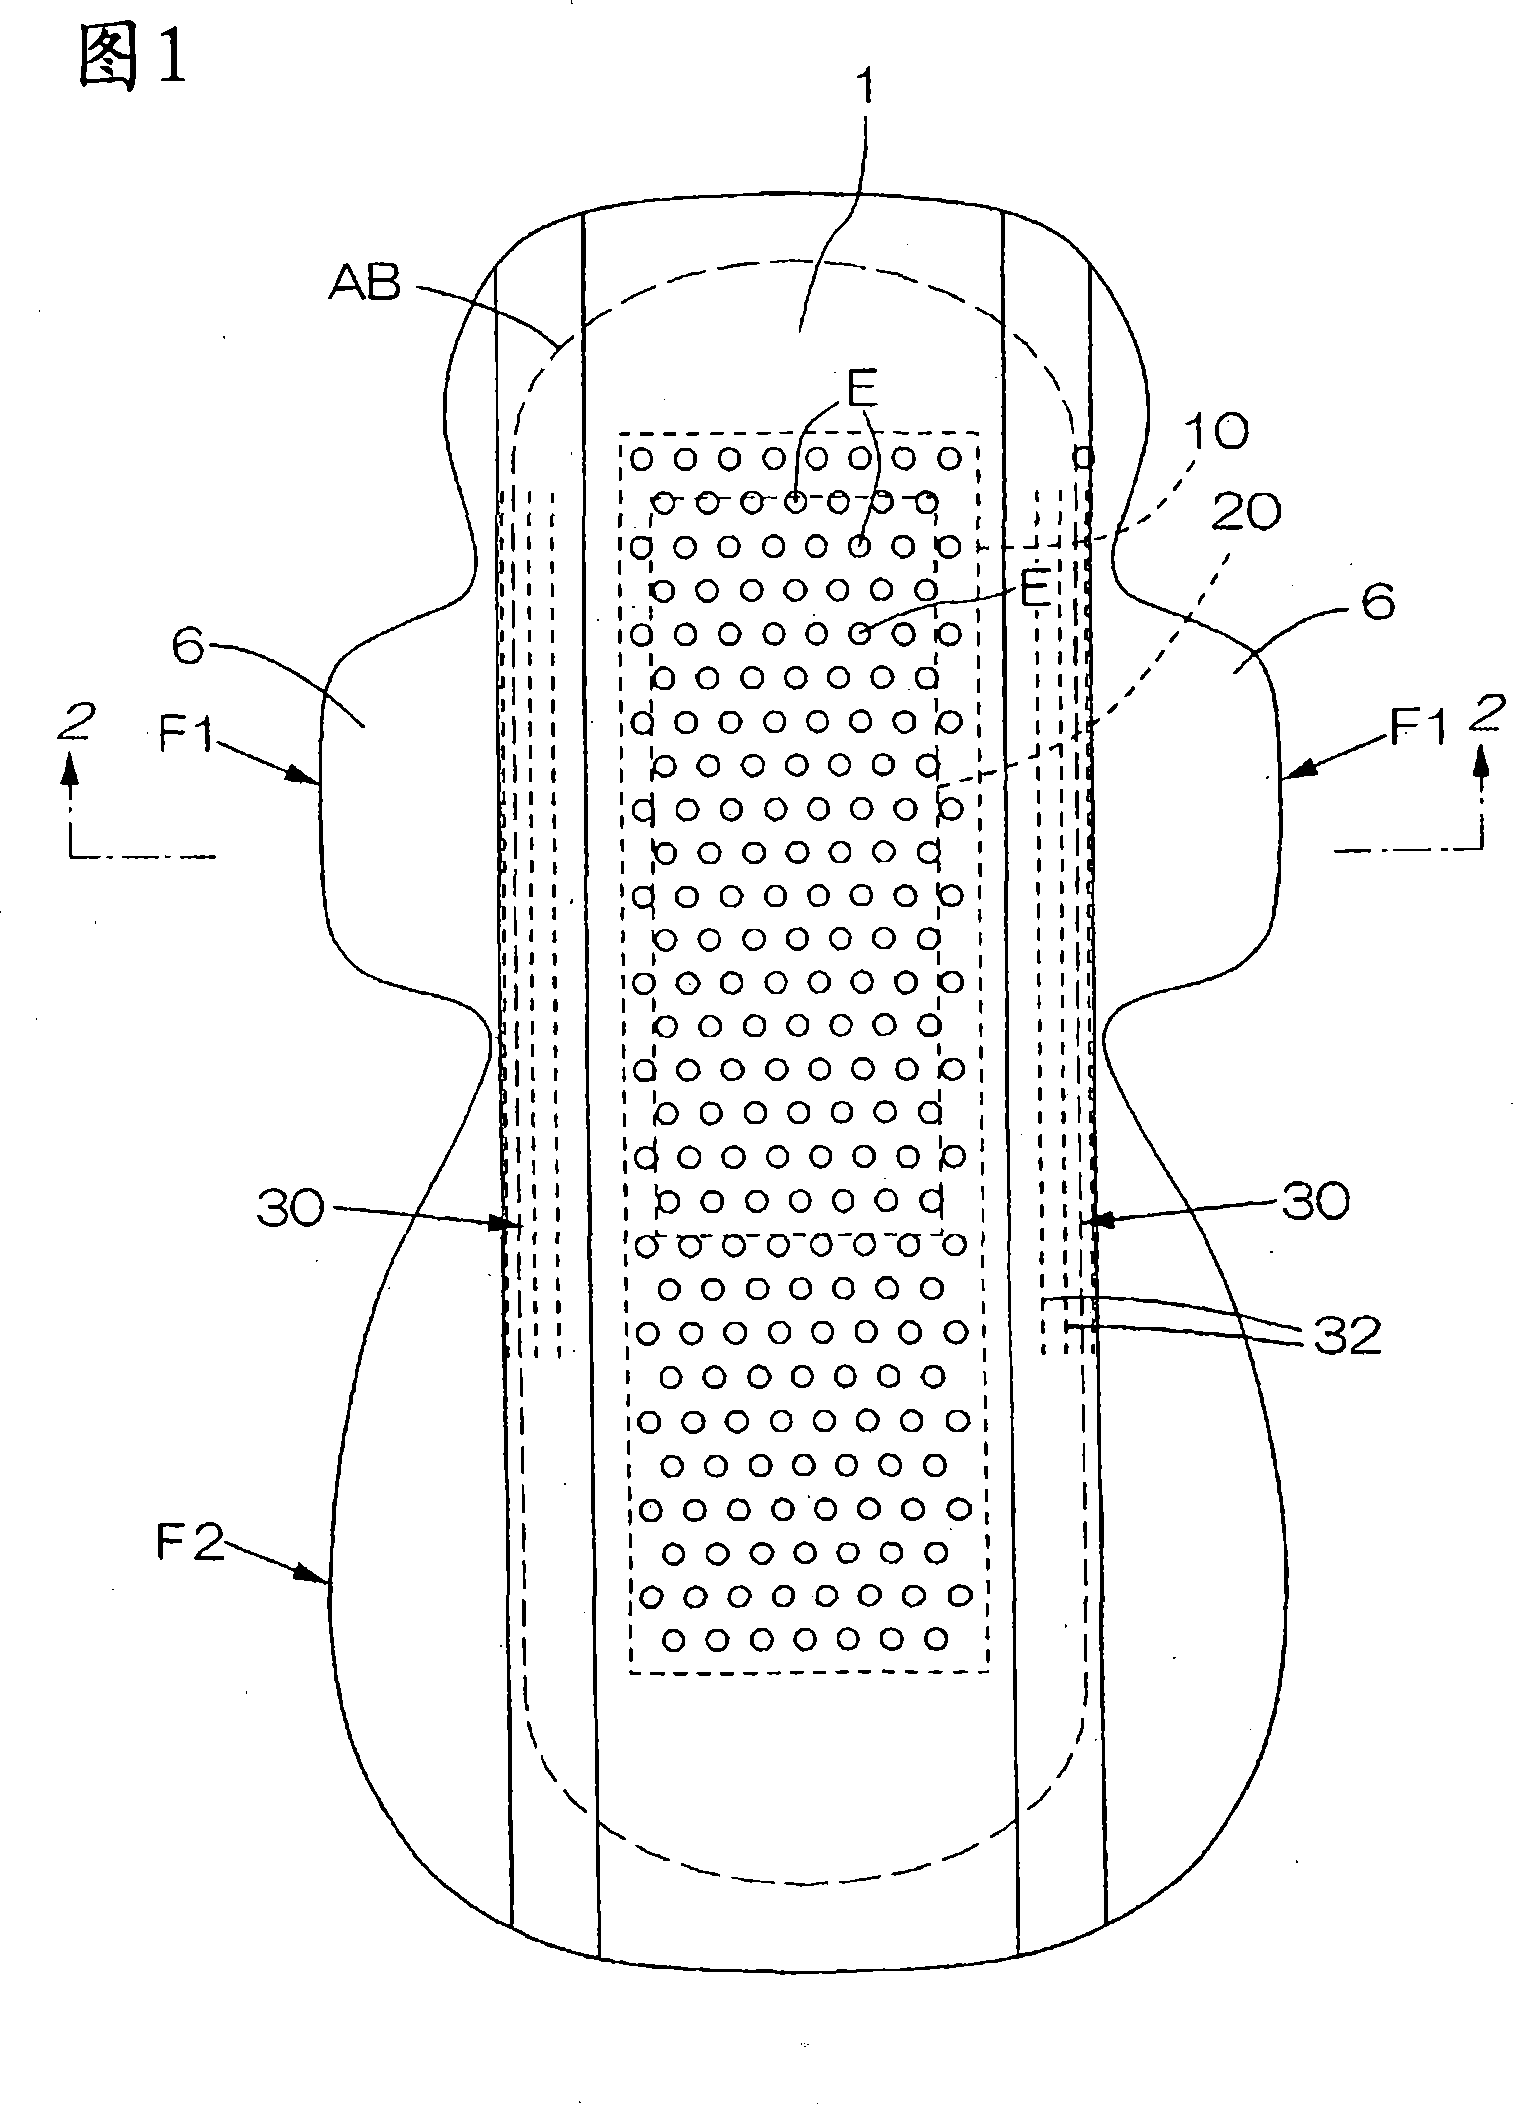 Humor absorbent article and process for producing the same